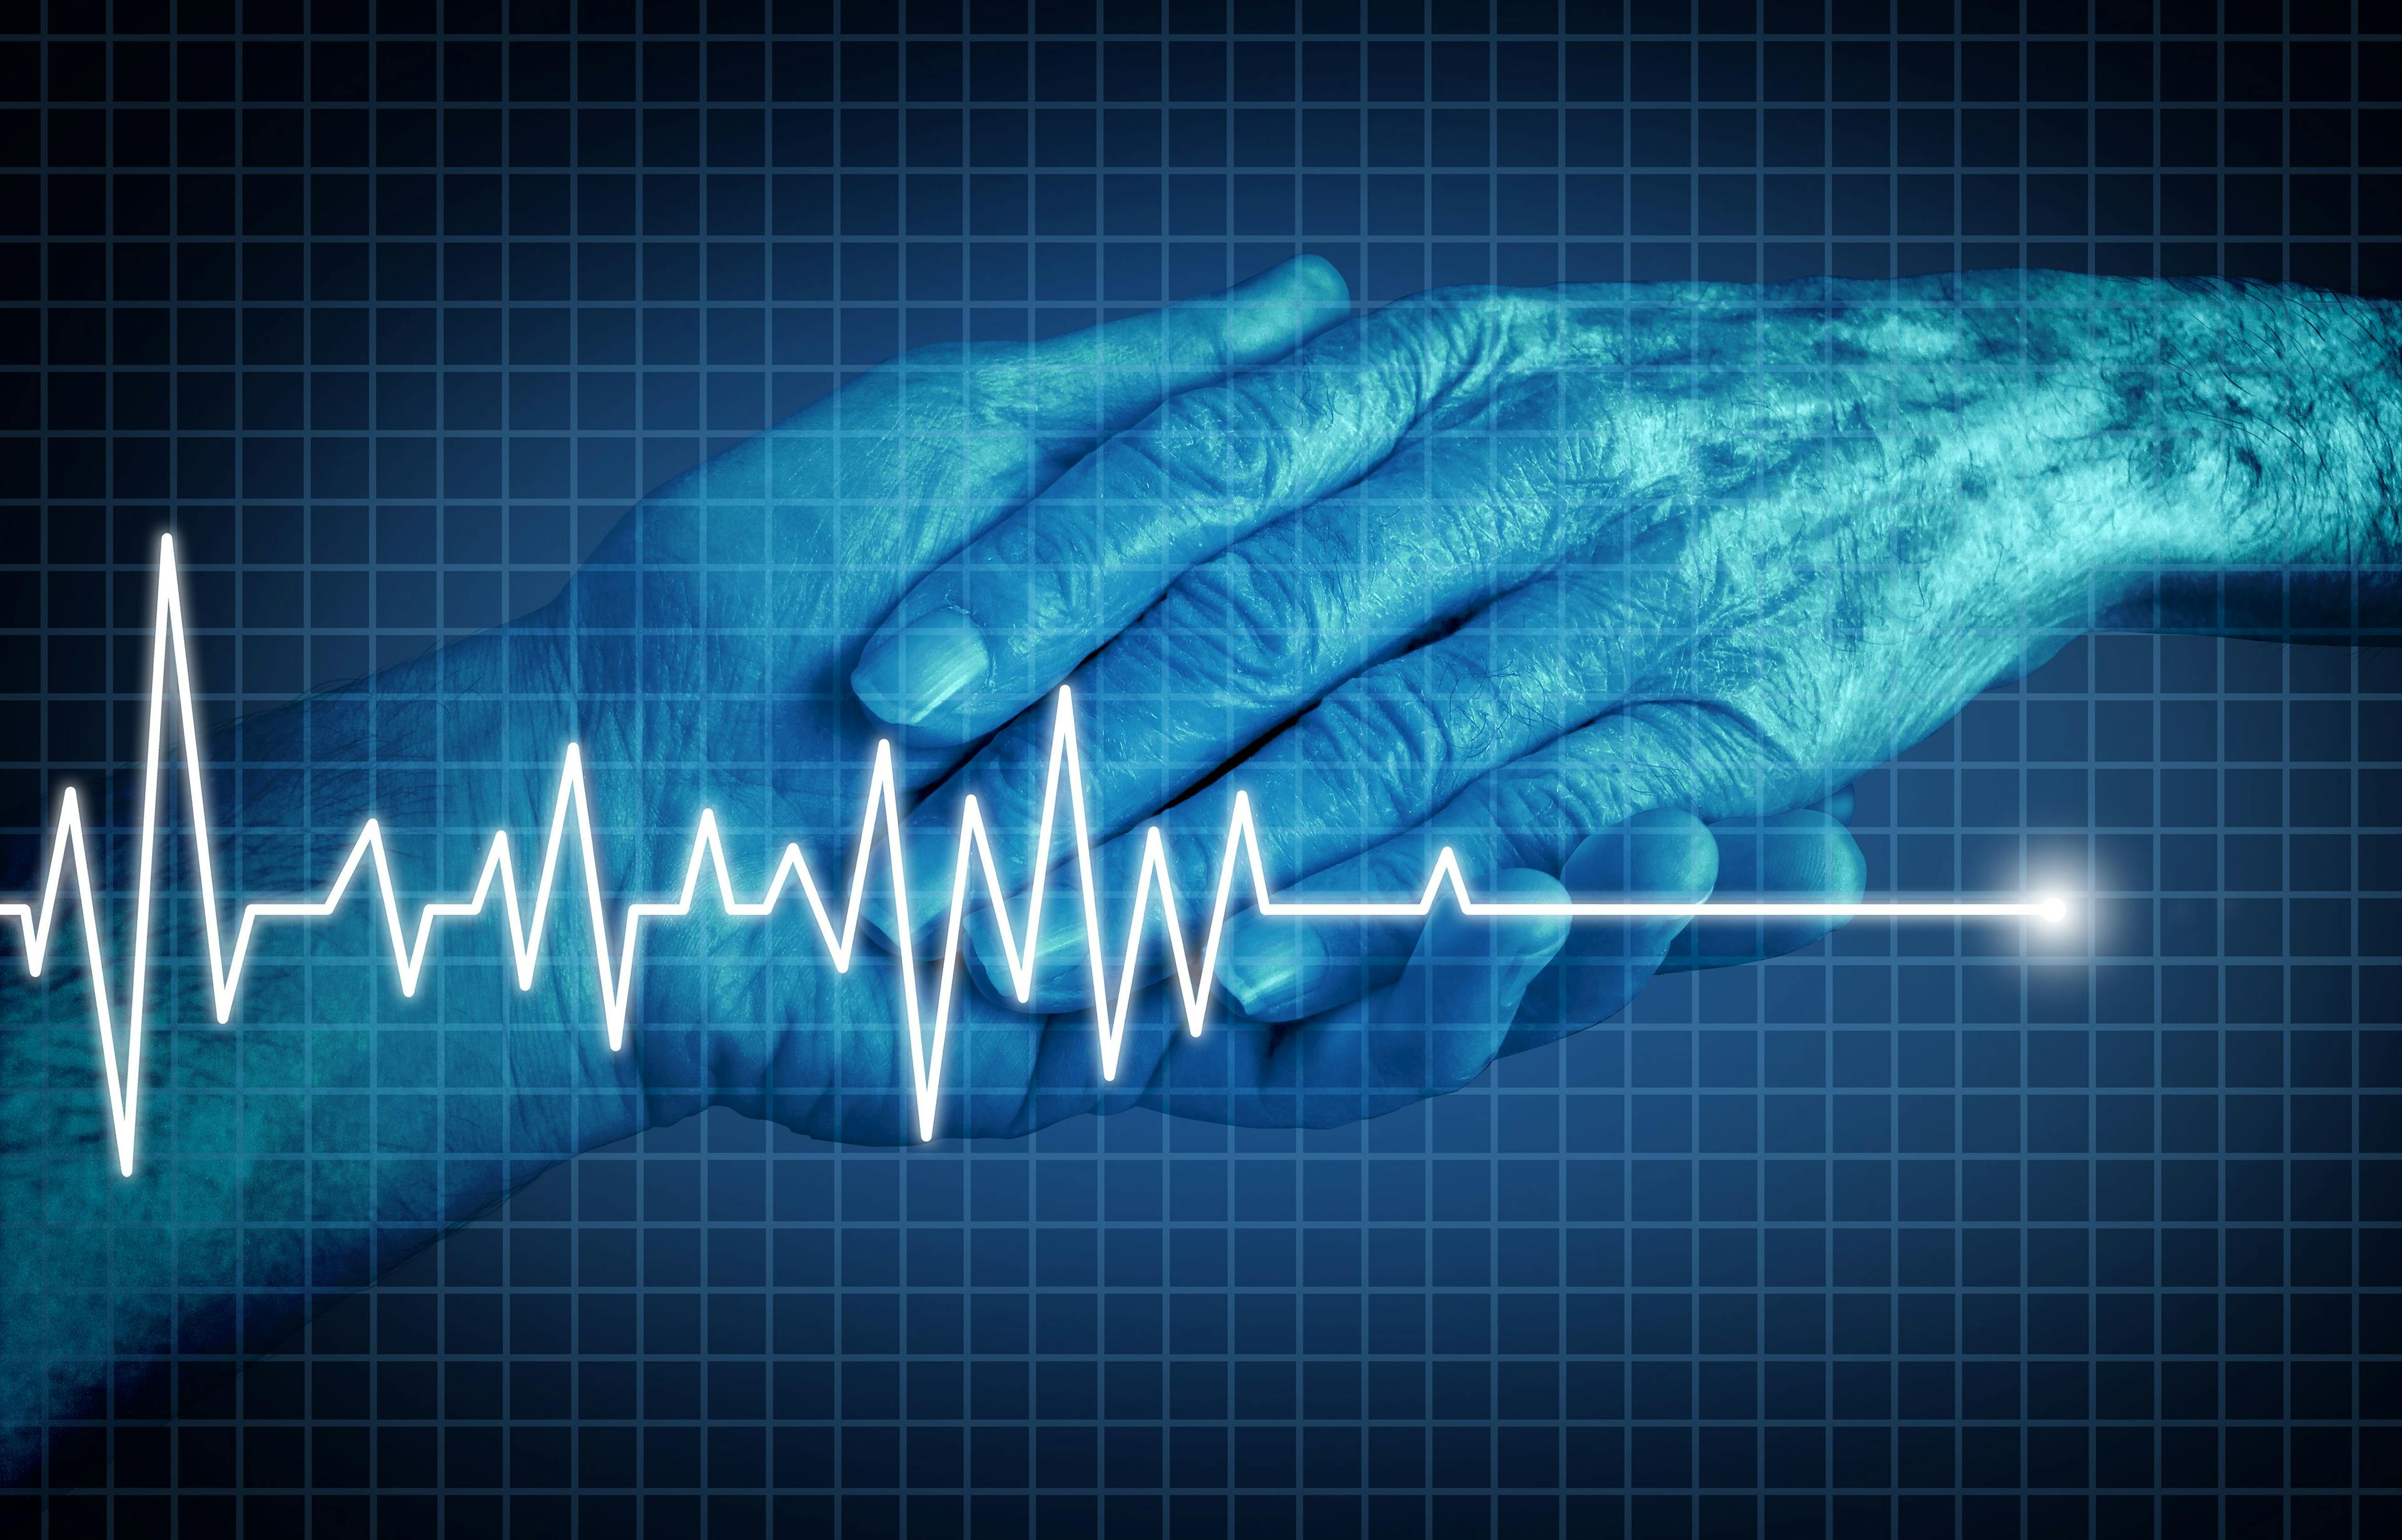 An older man's hand holding a younger man's hand. Over the image is an EKG which is spiking then flatlining